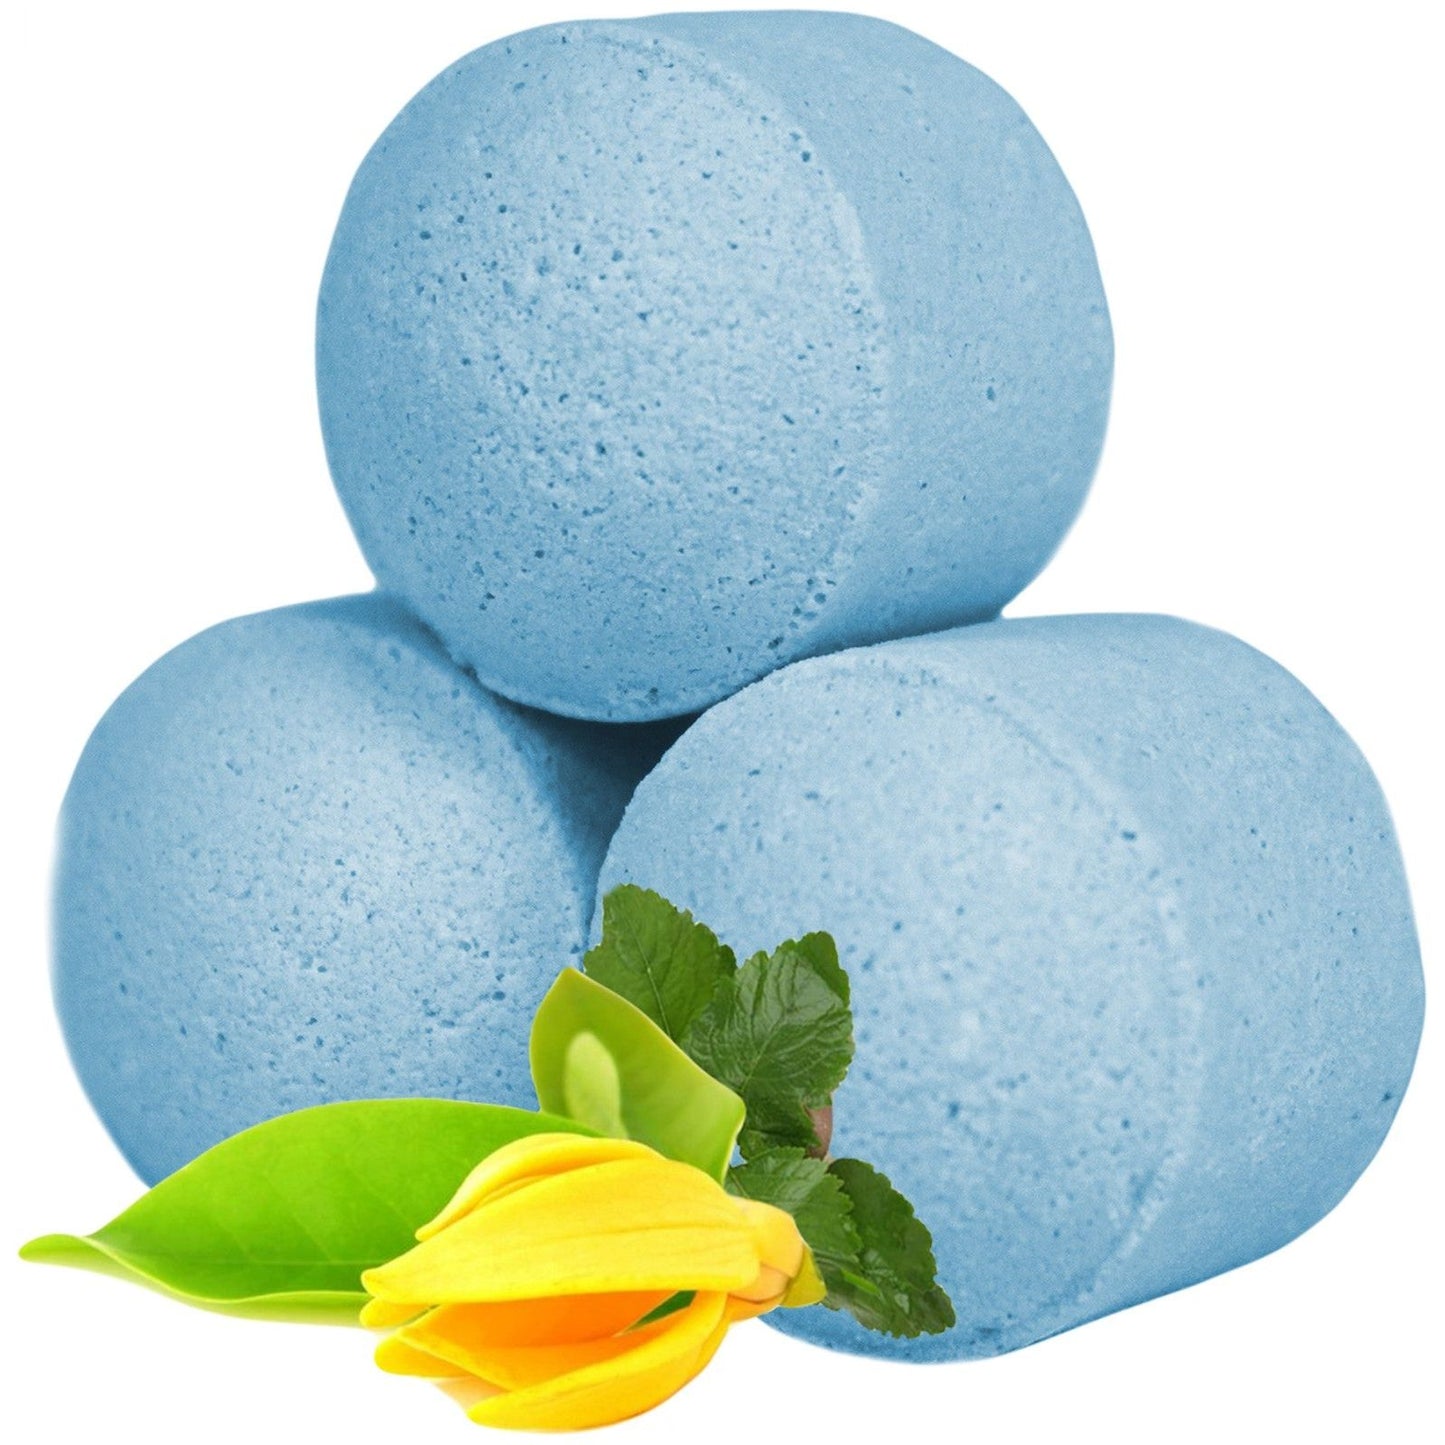 Ylang & Patchouli Bath Bombs 1.3Kg Box of Chill Pills - Ashton and Finch